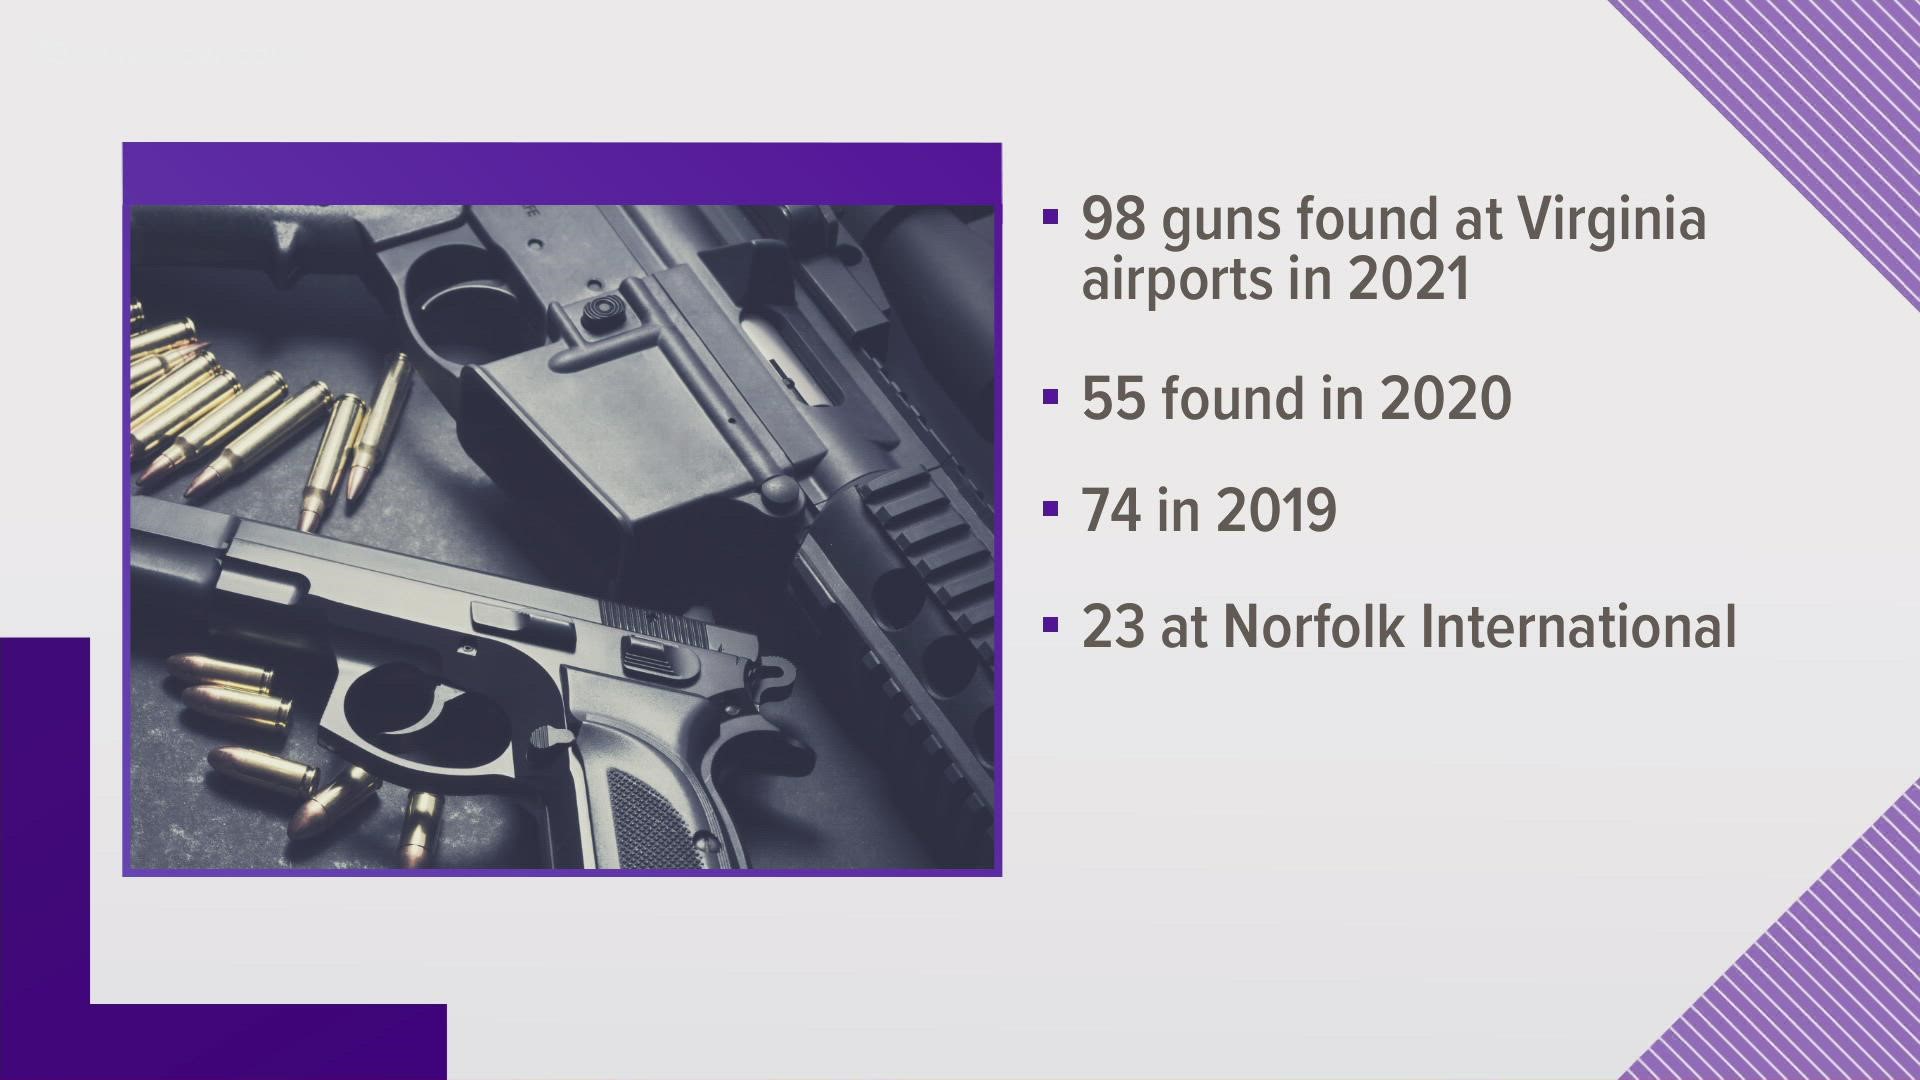 Of the 98 guns, 23 were found at Norfolk International Airport (ORF). That's almost double the number of guns found there in 2020.